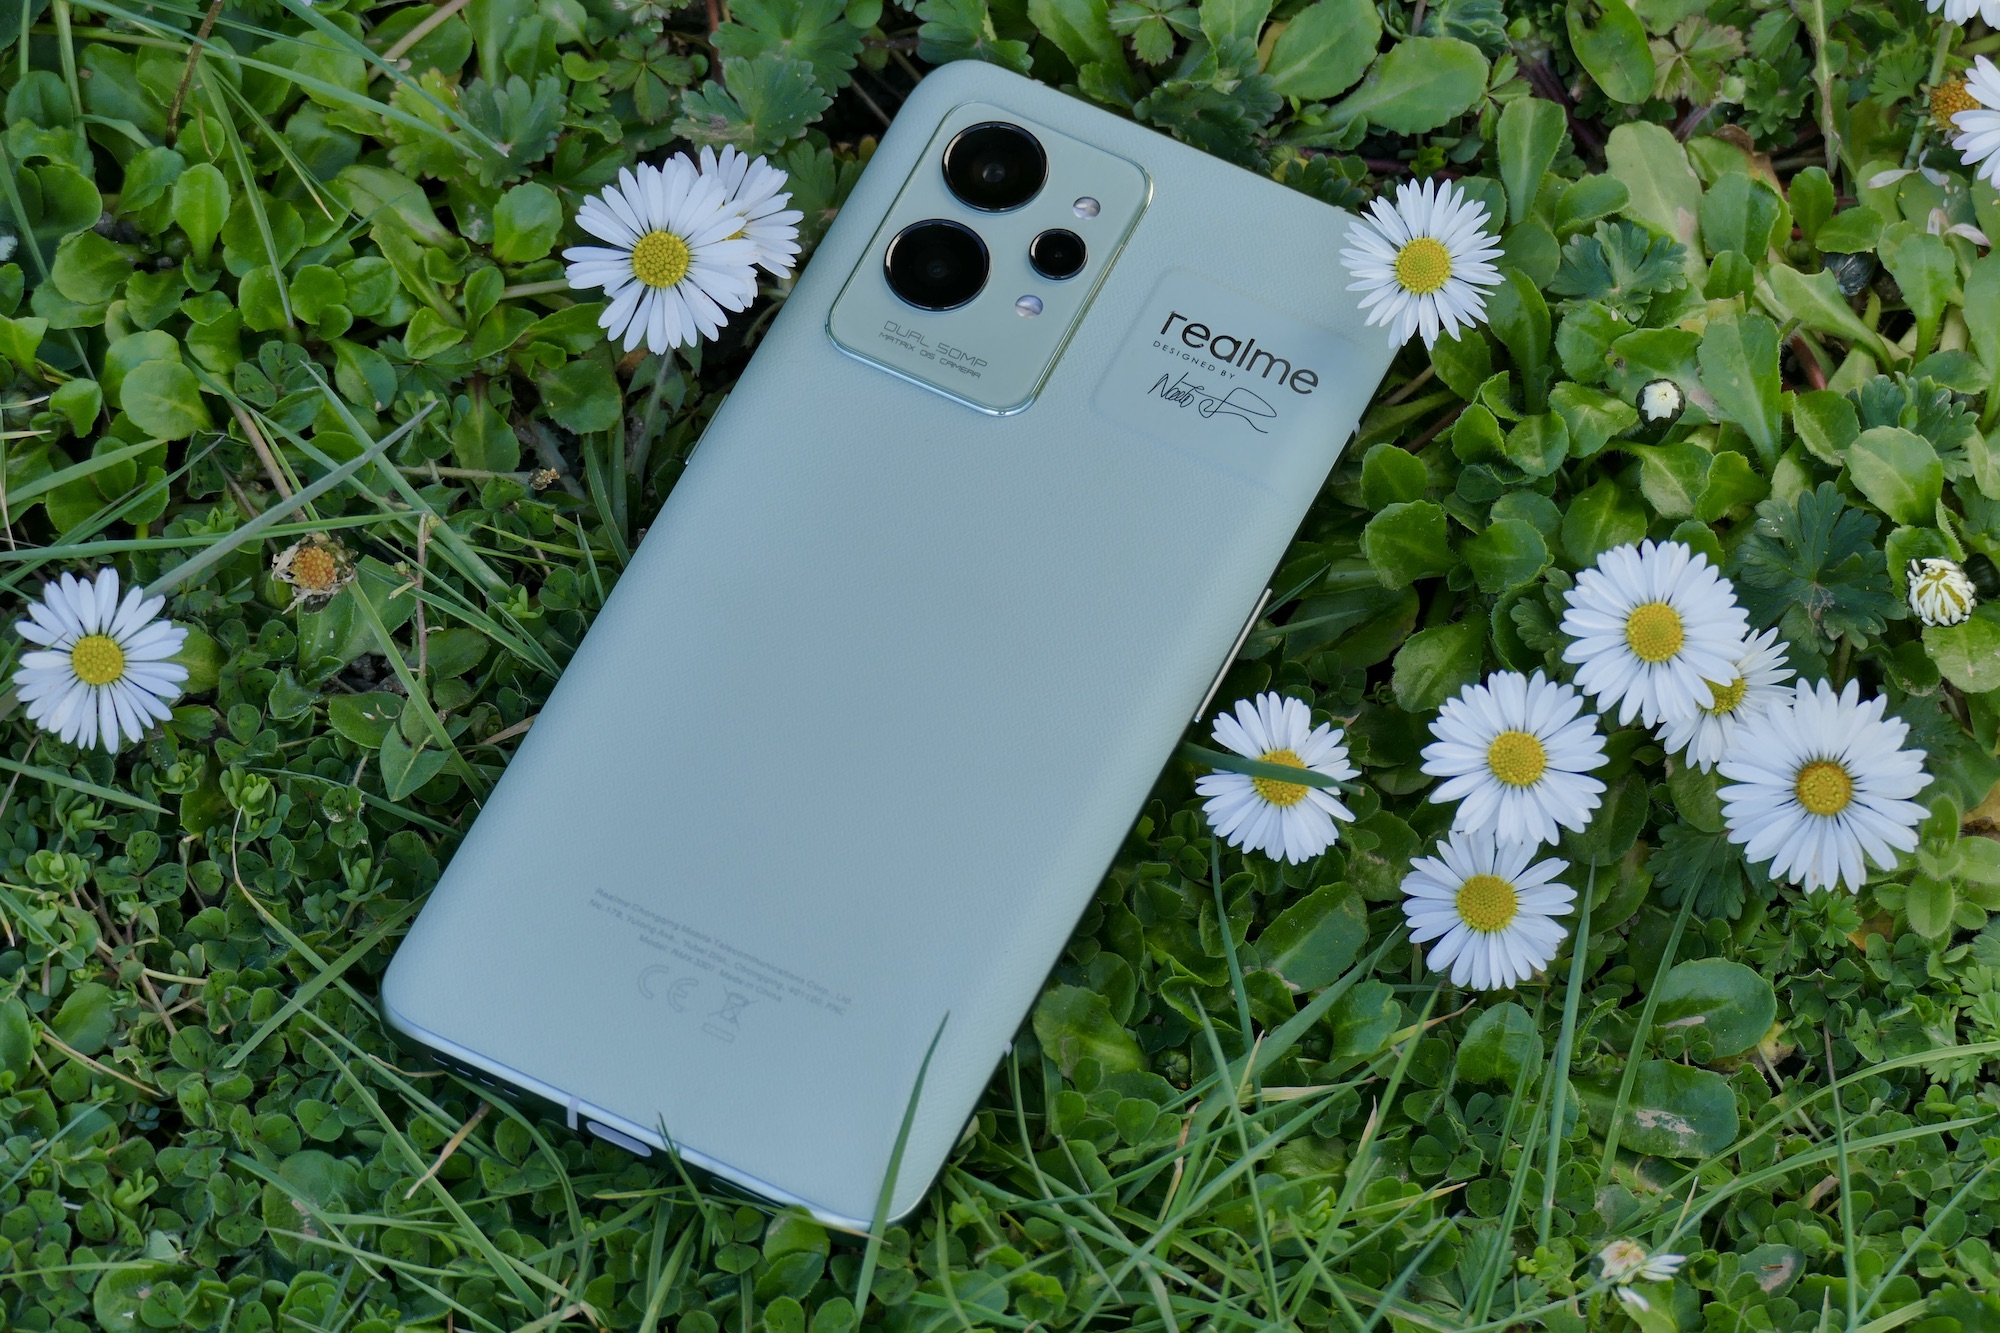 Realme GT 2 Pro review: a Pro phone without the price tag